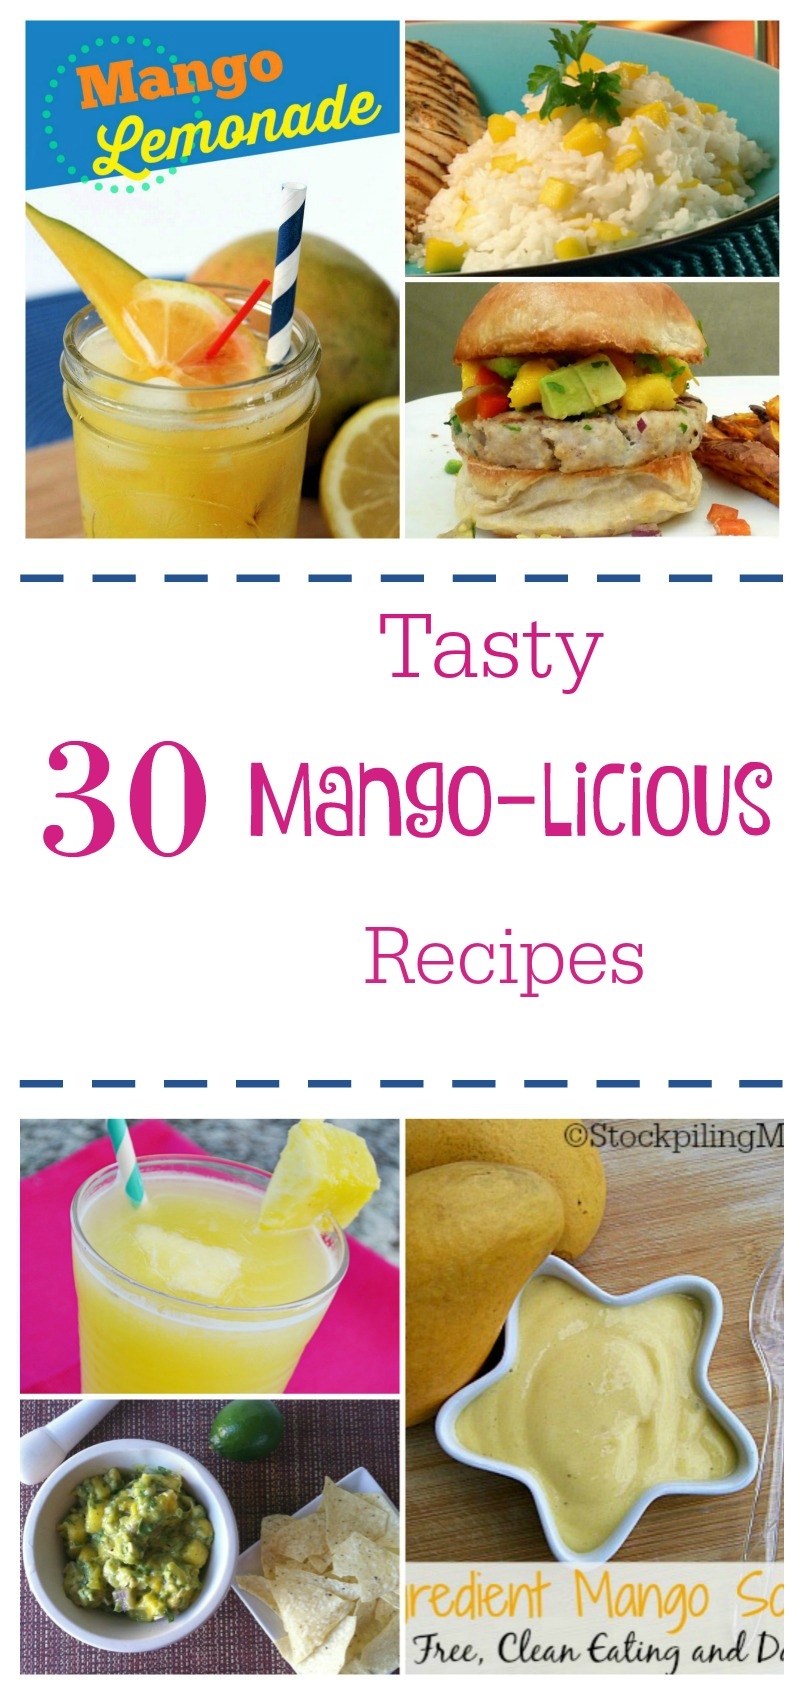 Looking for some delicious summer recipes? Check out these 30 tasty mango recipes here!